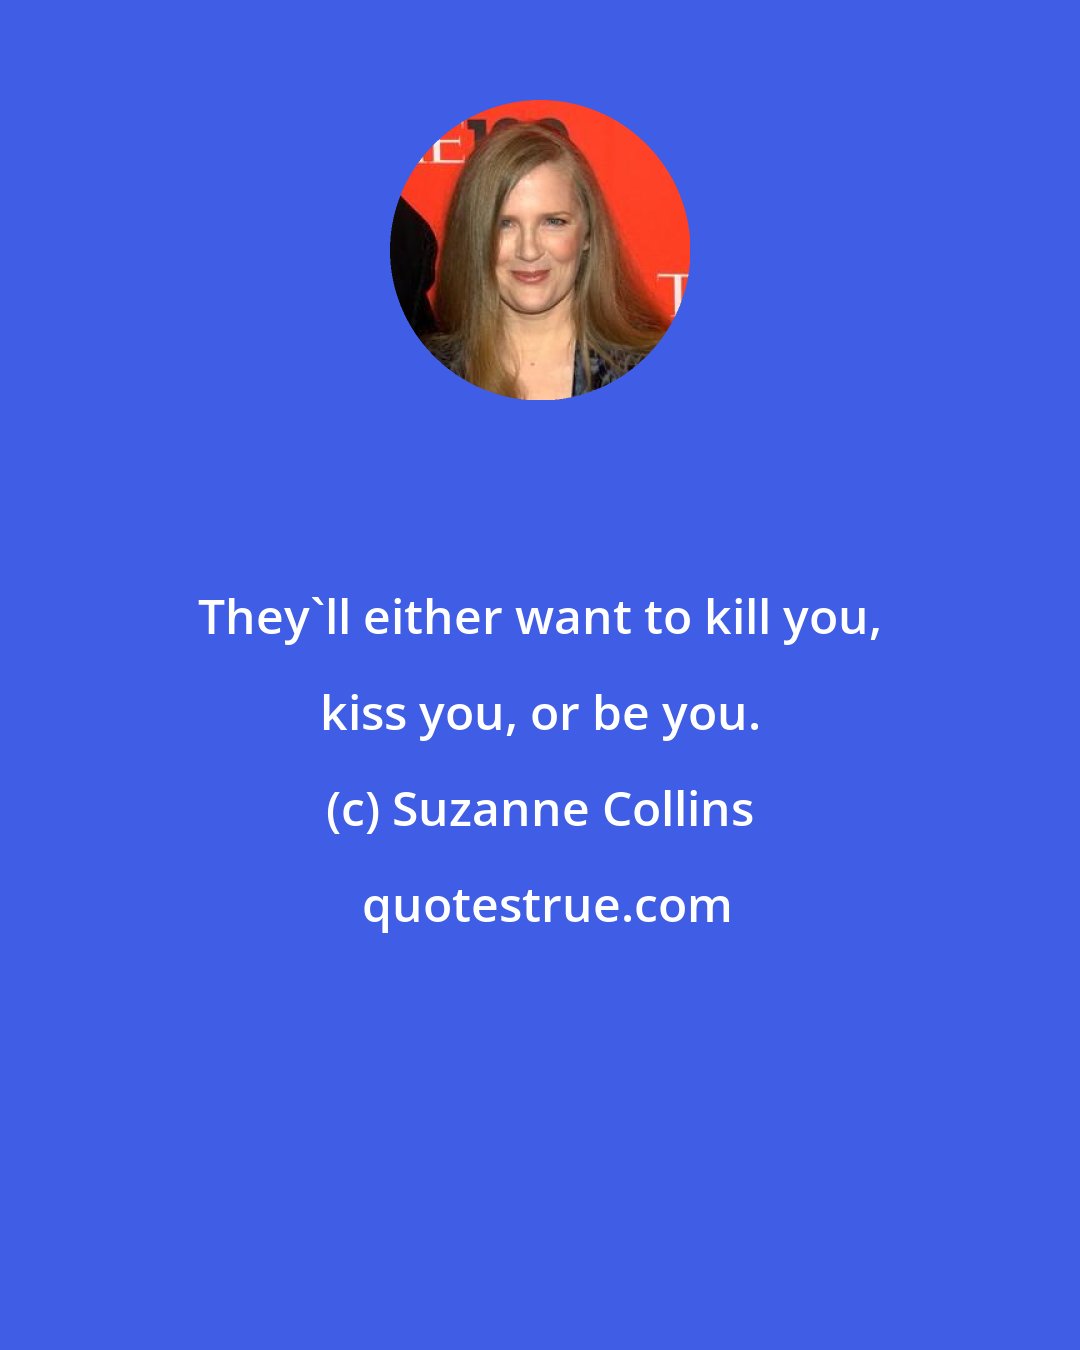 Suzanne Collins: They'll either want to kill you, kiss you, or be you.